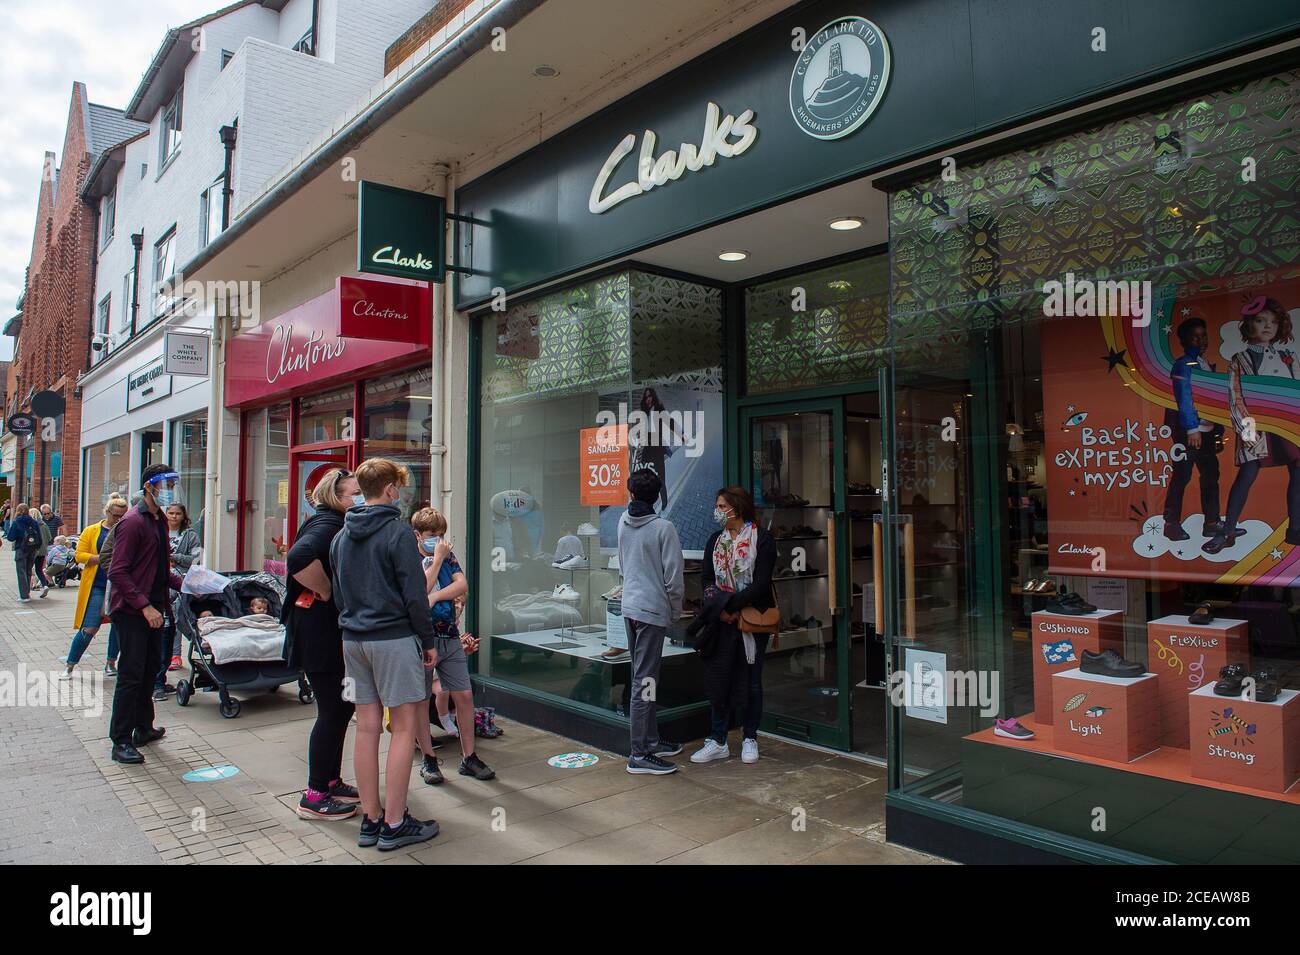 Windsor, Berkshire, UK. 31st August, 2020. Parents leave it very last minute to get new school shoes for their children as they queue outside Clarks shoe shop. Windsor was very busy today with tourists and locals visiting the town on a warmer than expected August Bank Holiday Monday. Credit: Maureen McLean/Alamy Stock Photo